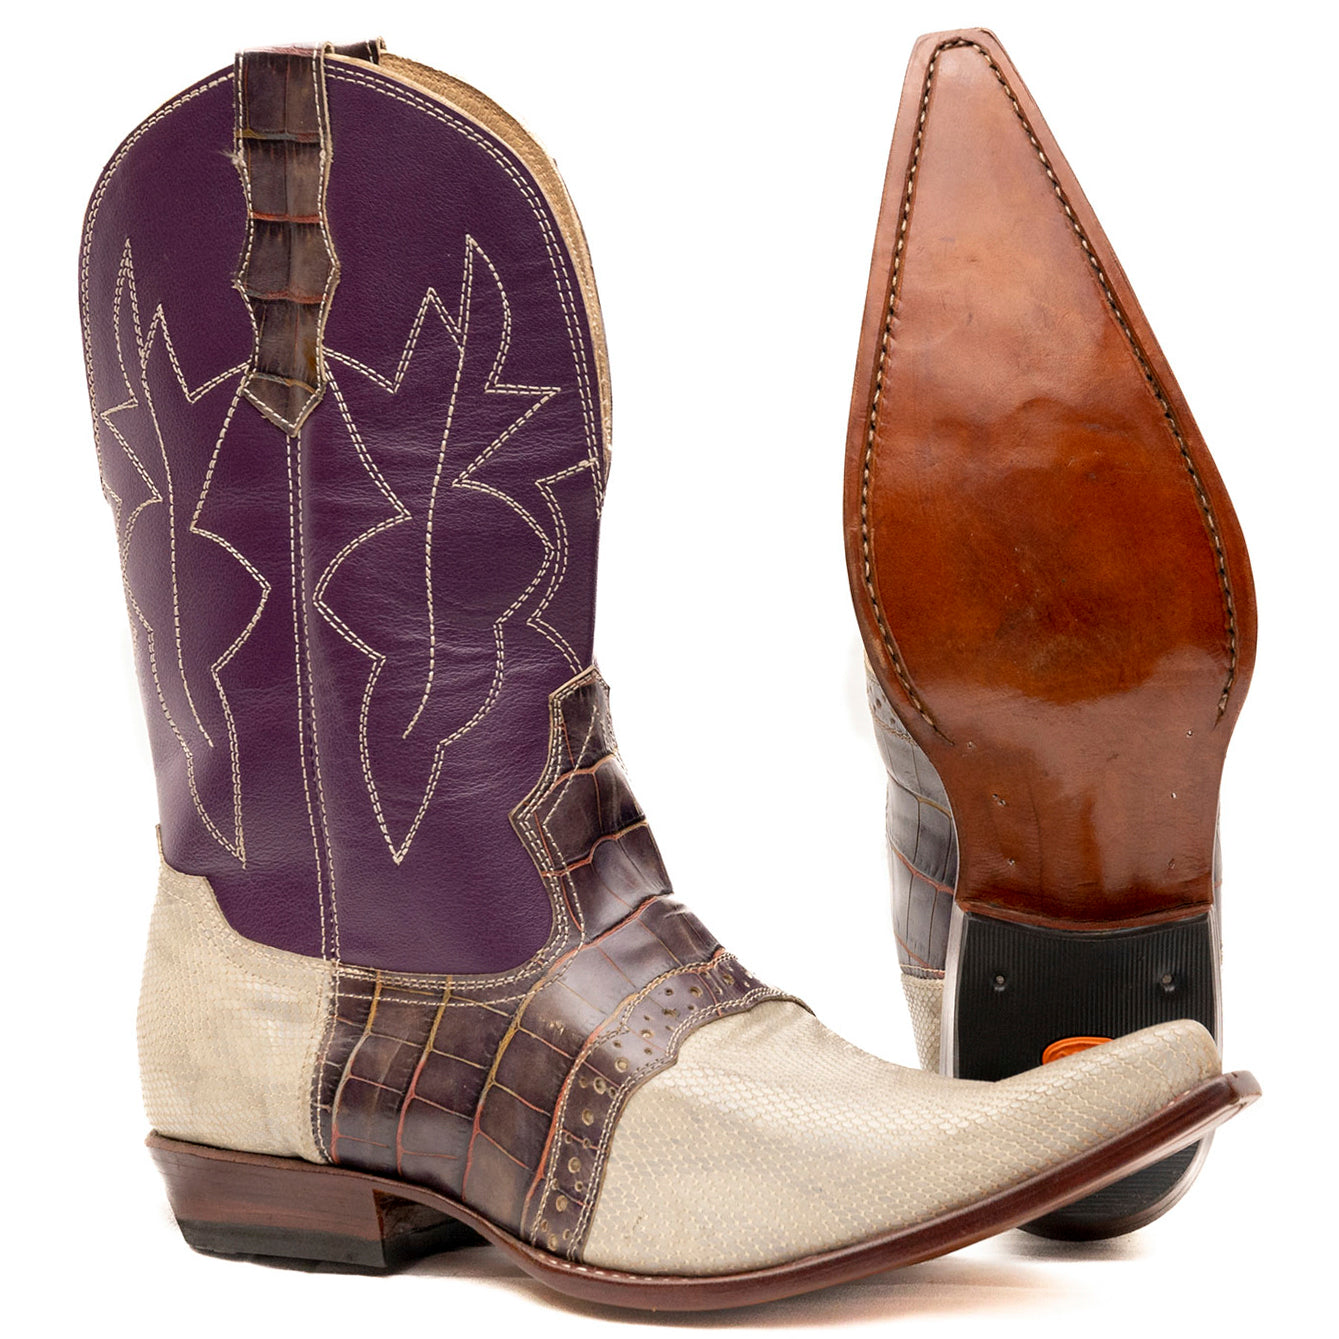 Mexican Double Stitched Cowboy Boots with perforations